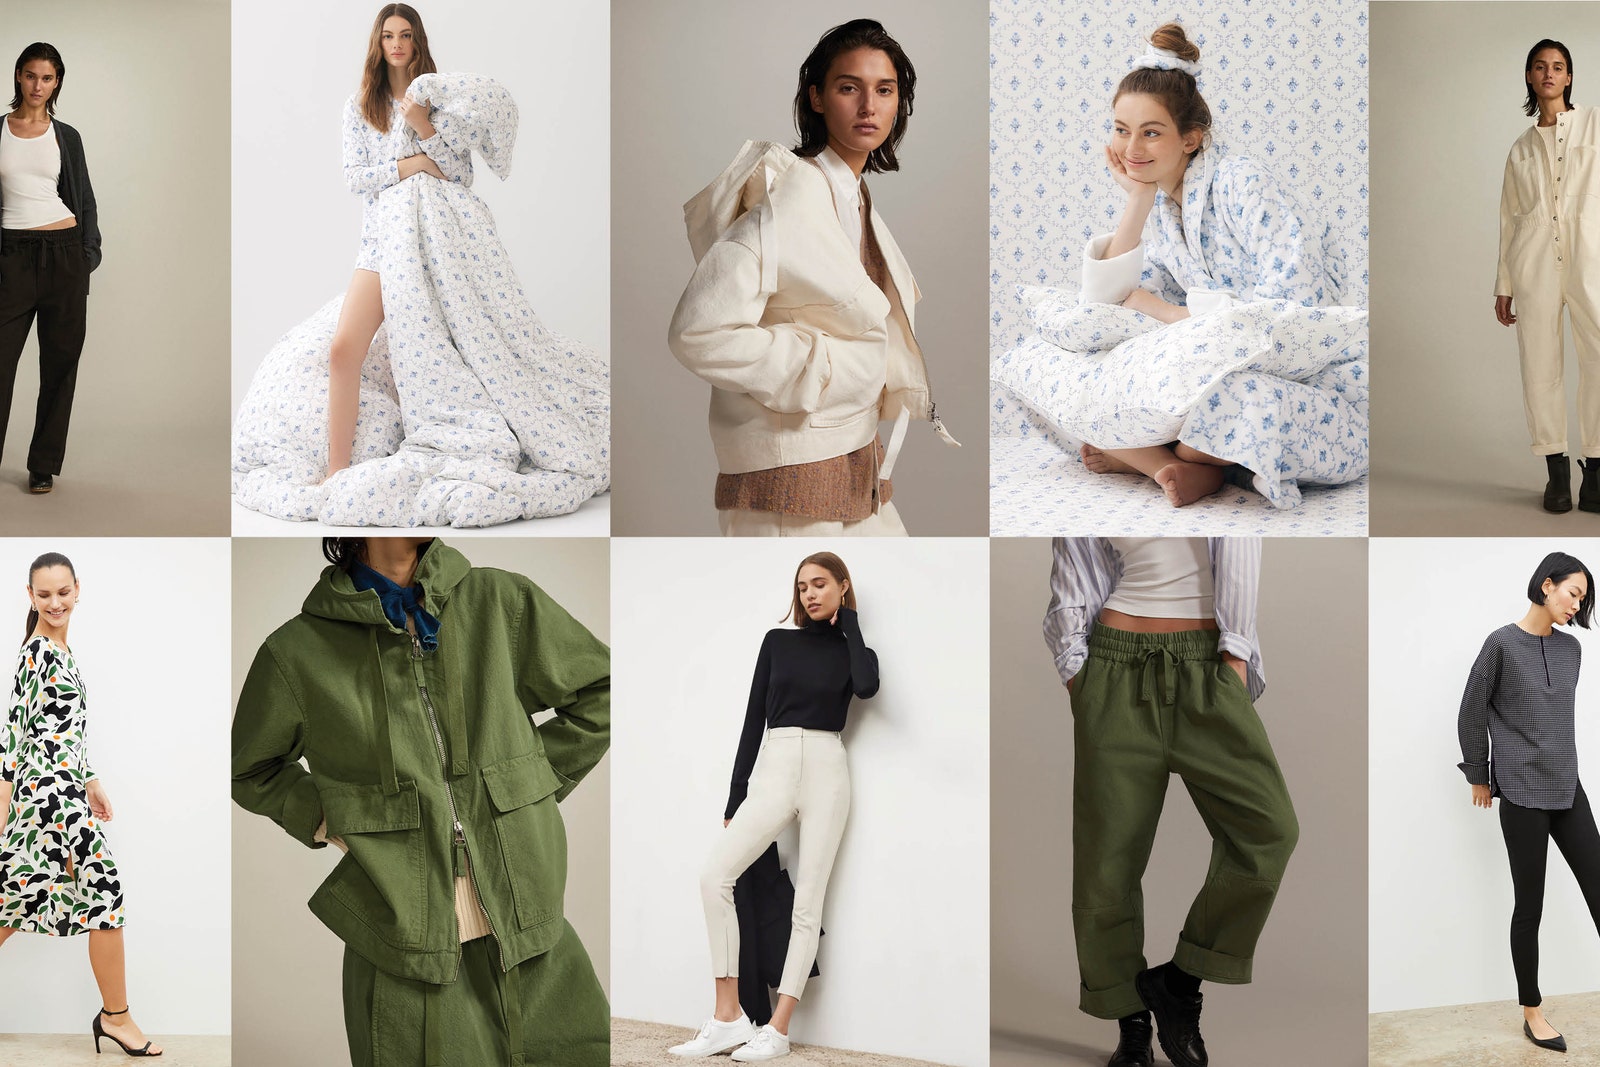 Taking Off: The Best New Travel Gear from Everlane, Lunya, and Summer Fridays